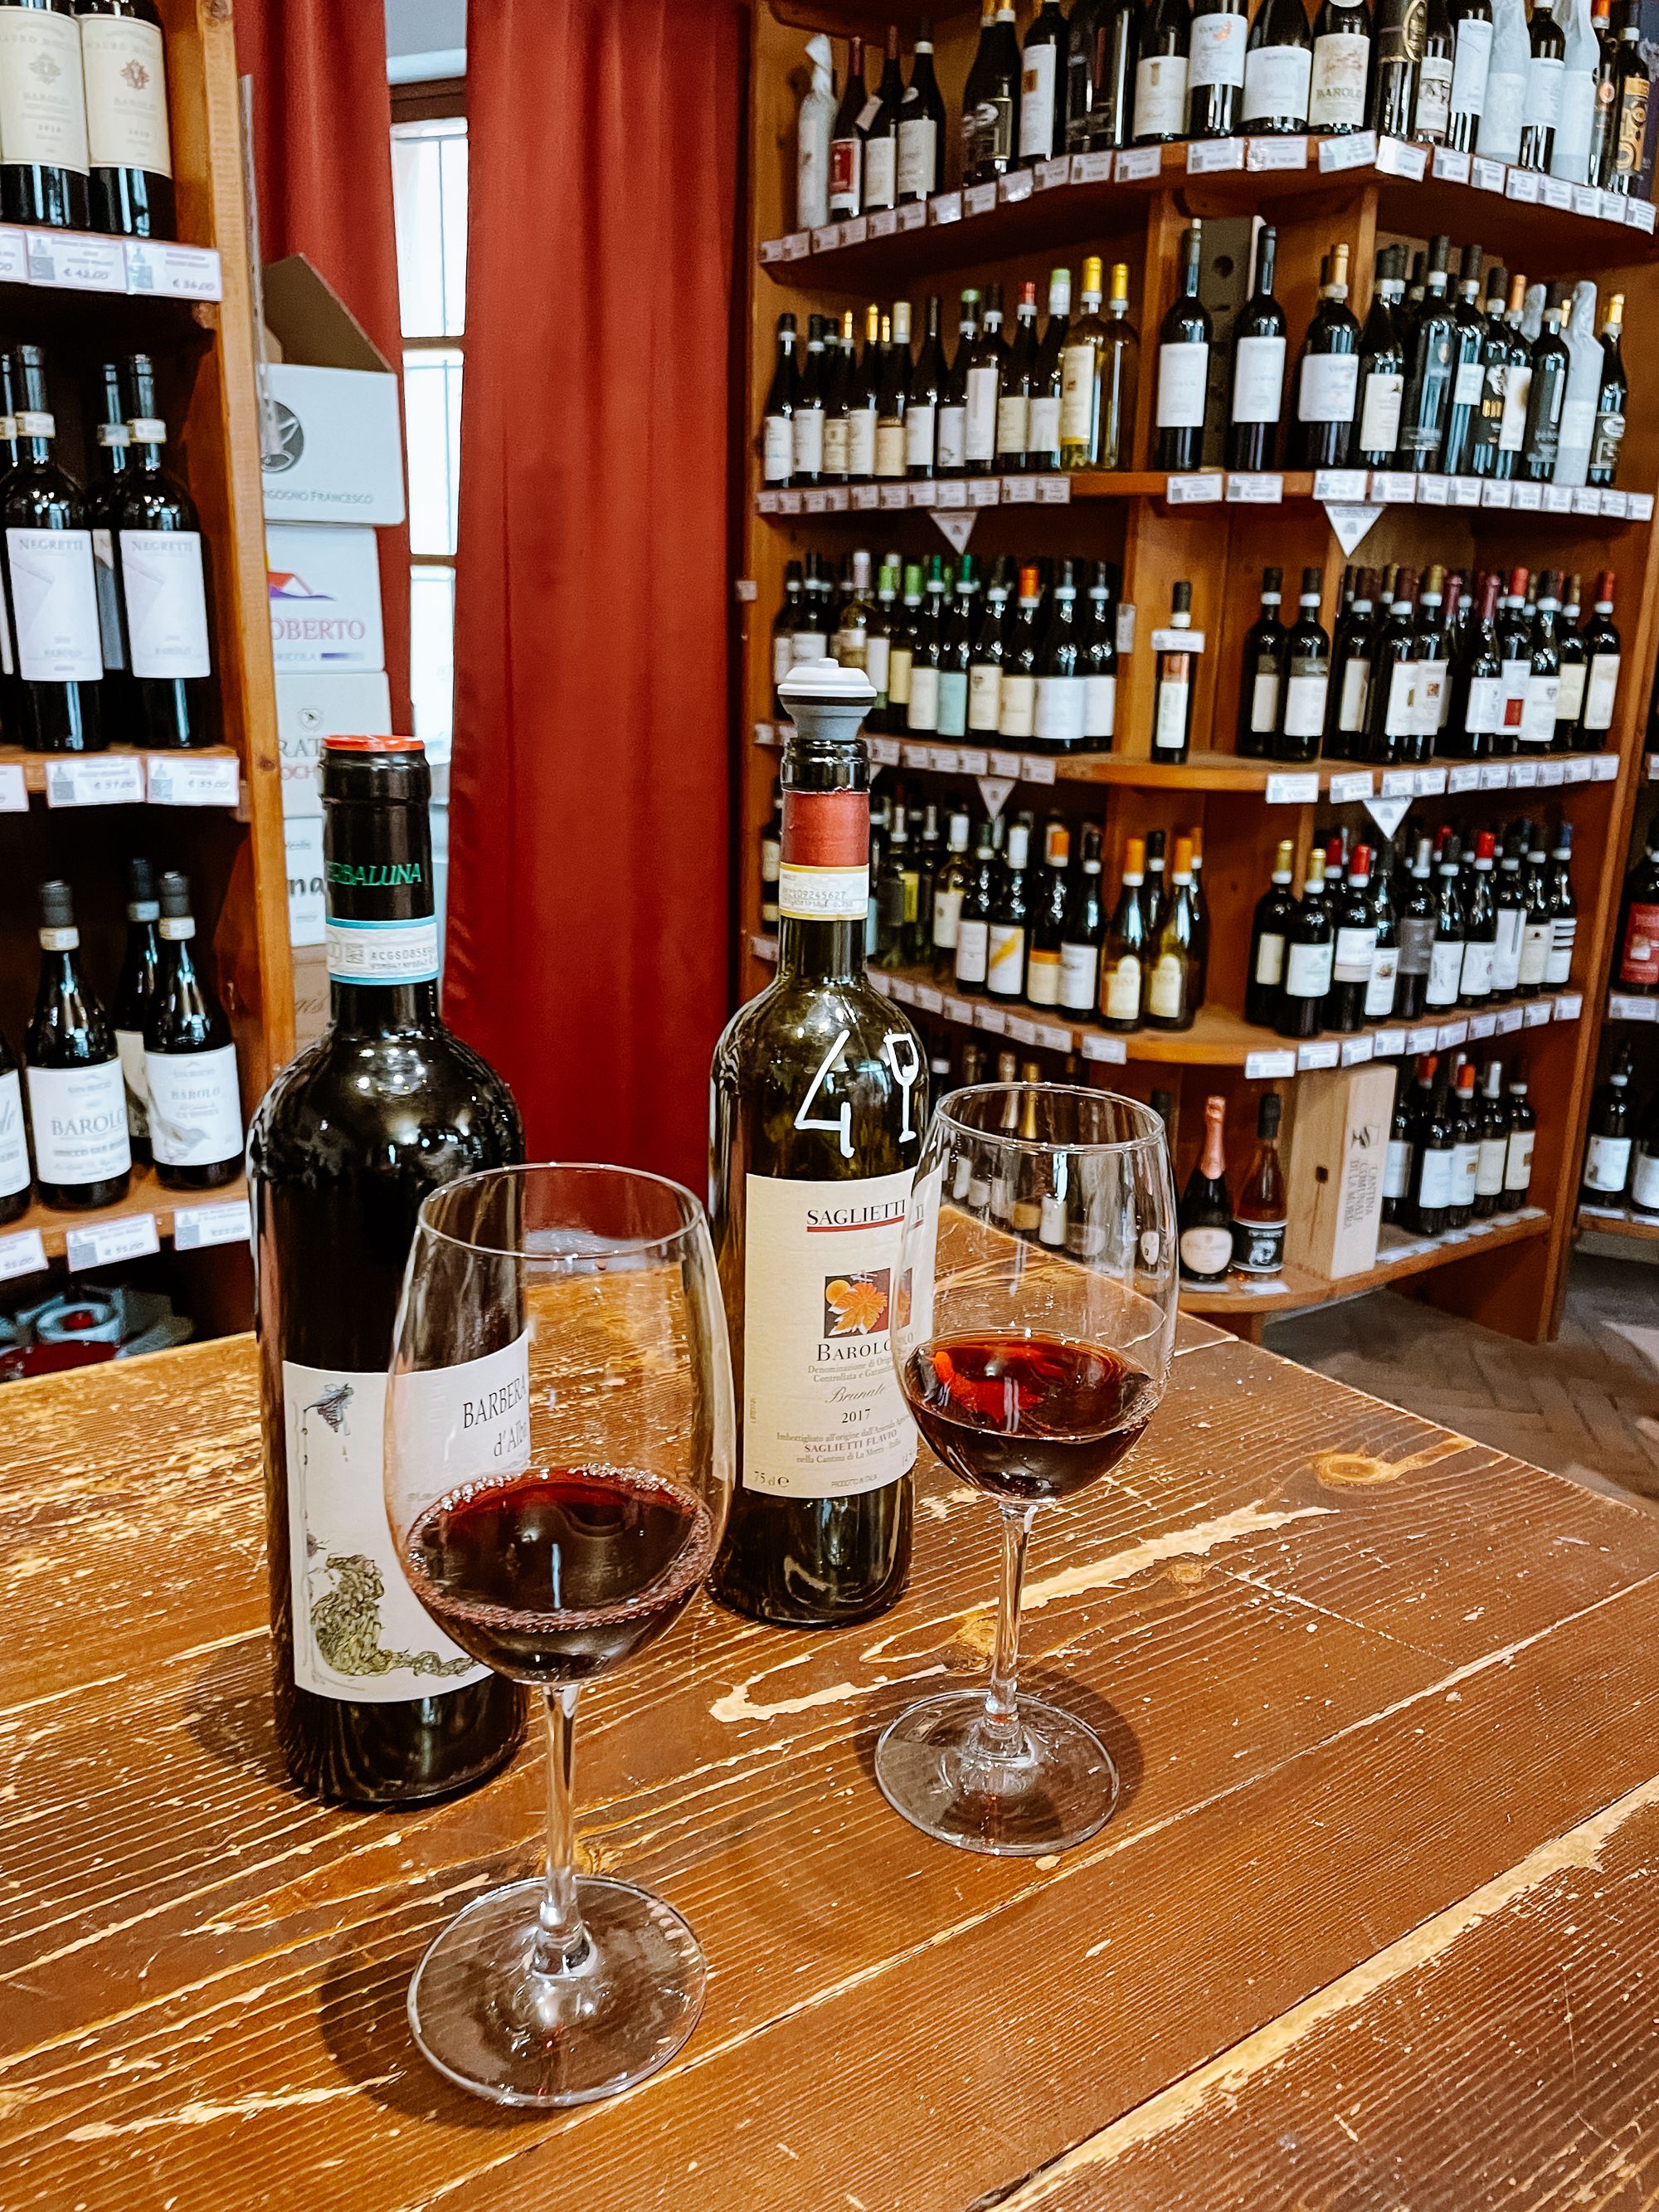 Two glasses of red wine in front of their corresponding bottles in a wine shop